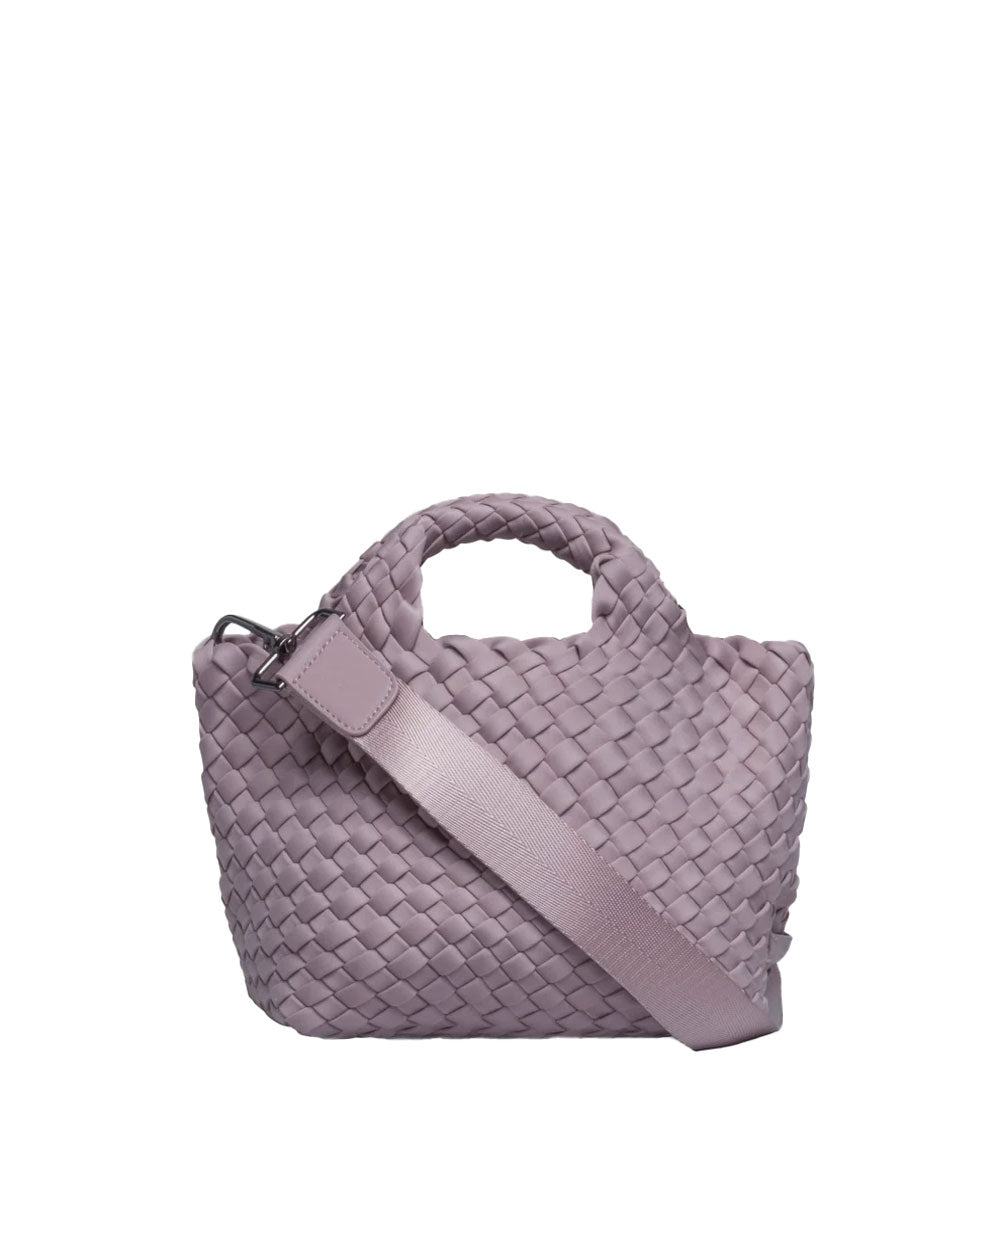 St. Barths Petit Tote in Lilac